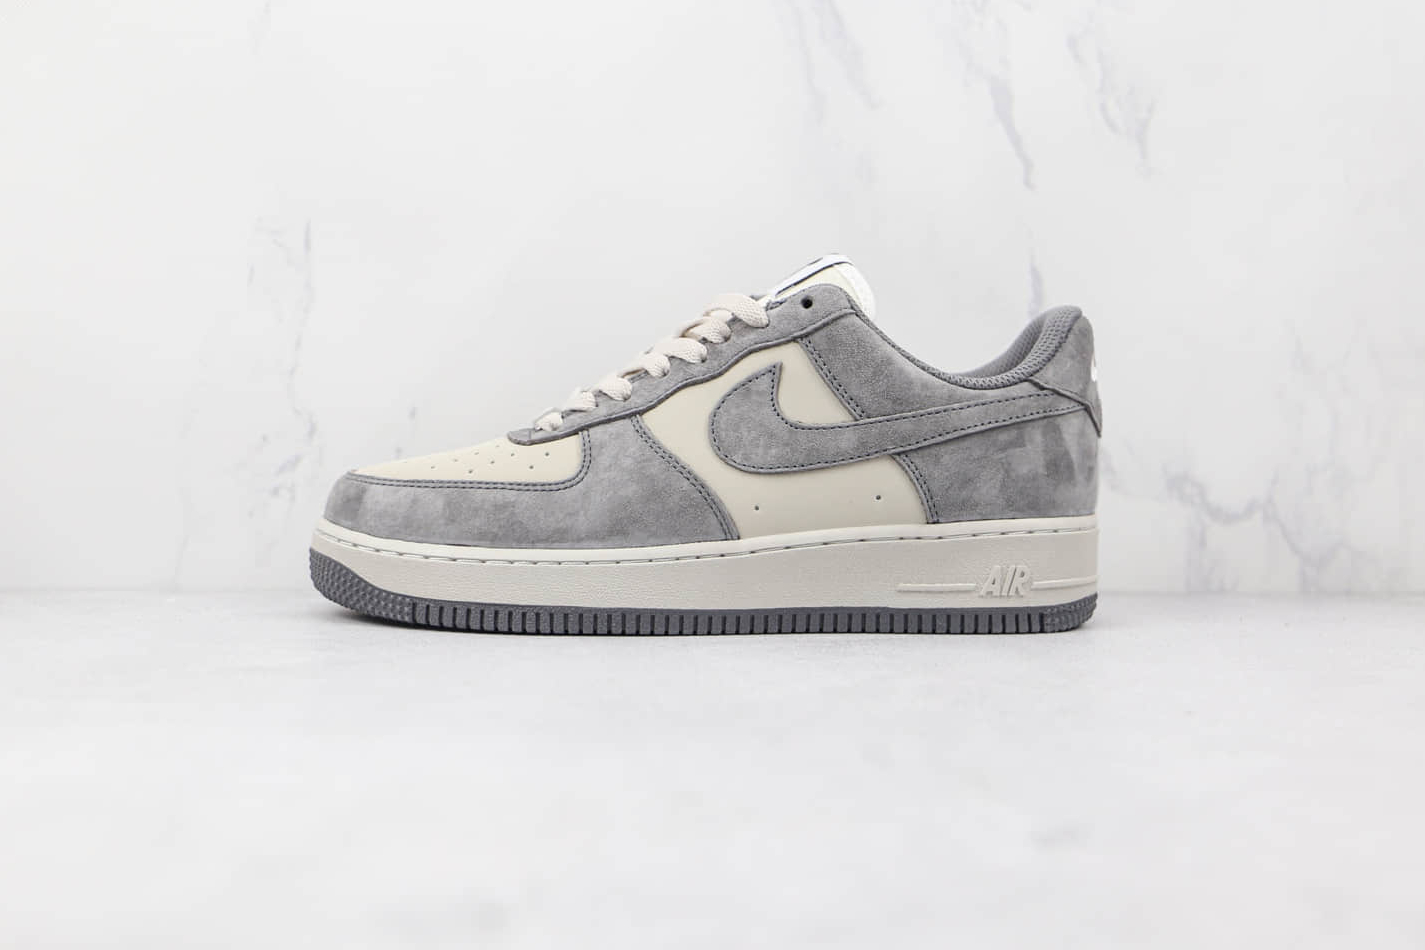 Nike Air Force 1 07 Low Wolf Grey White Shoes CW2288-866 - Stylish and Iconic Footwear for Men and Women